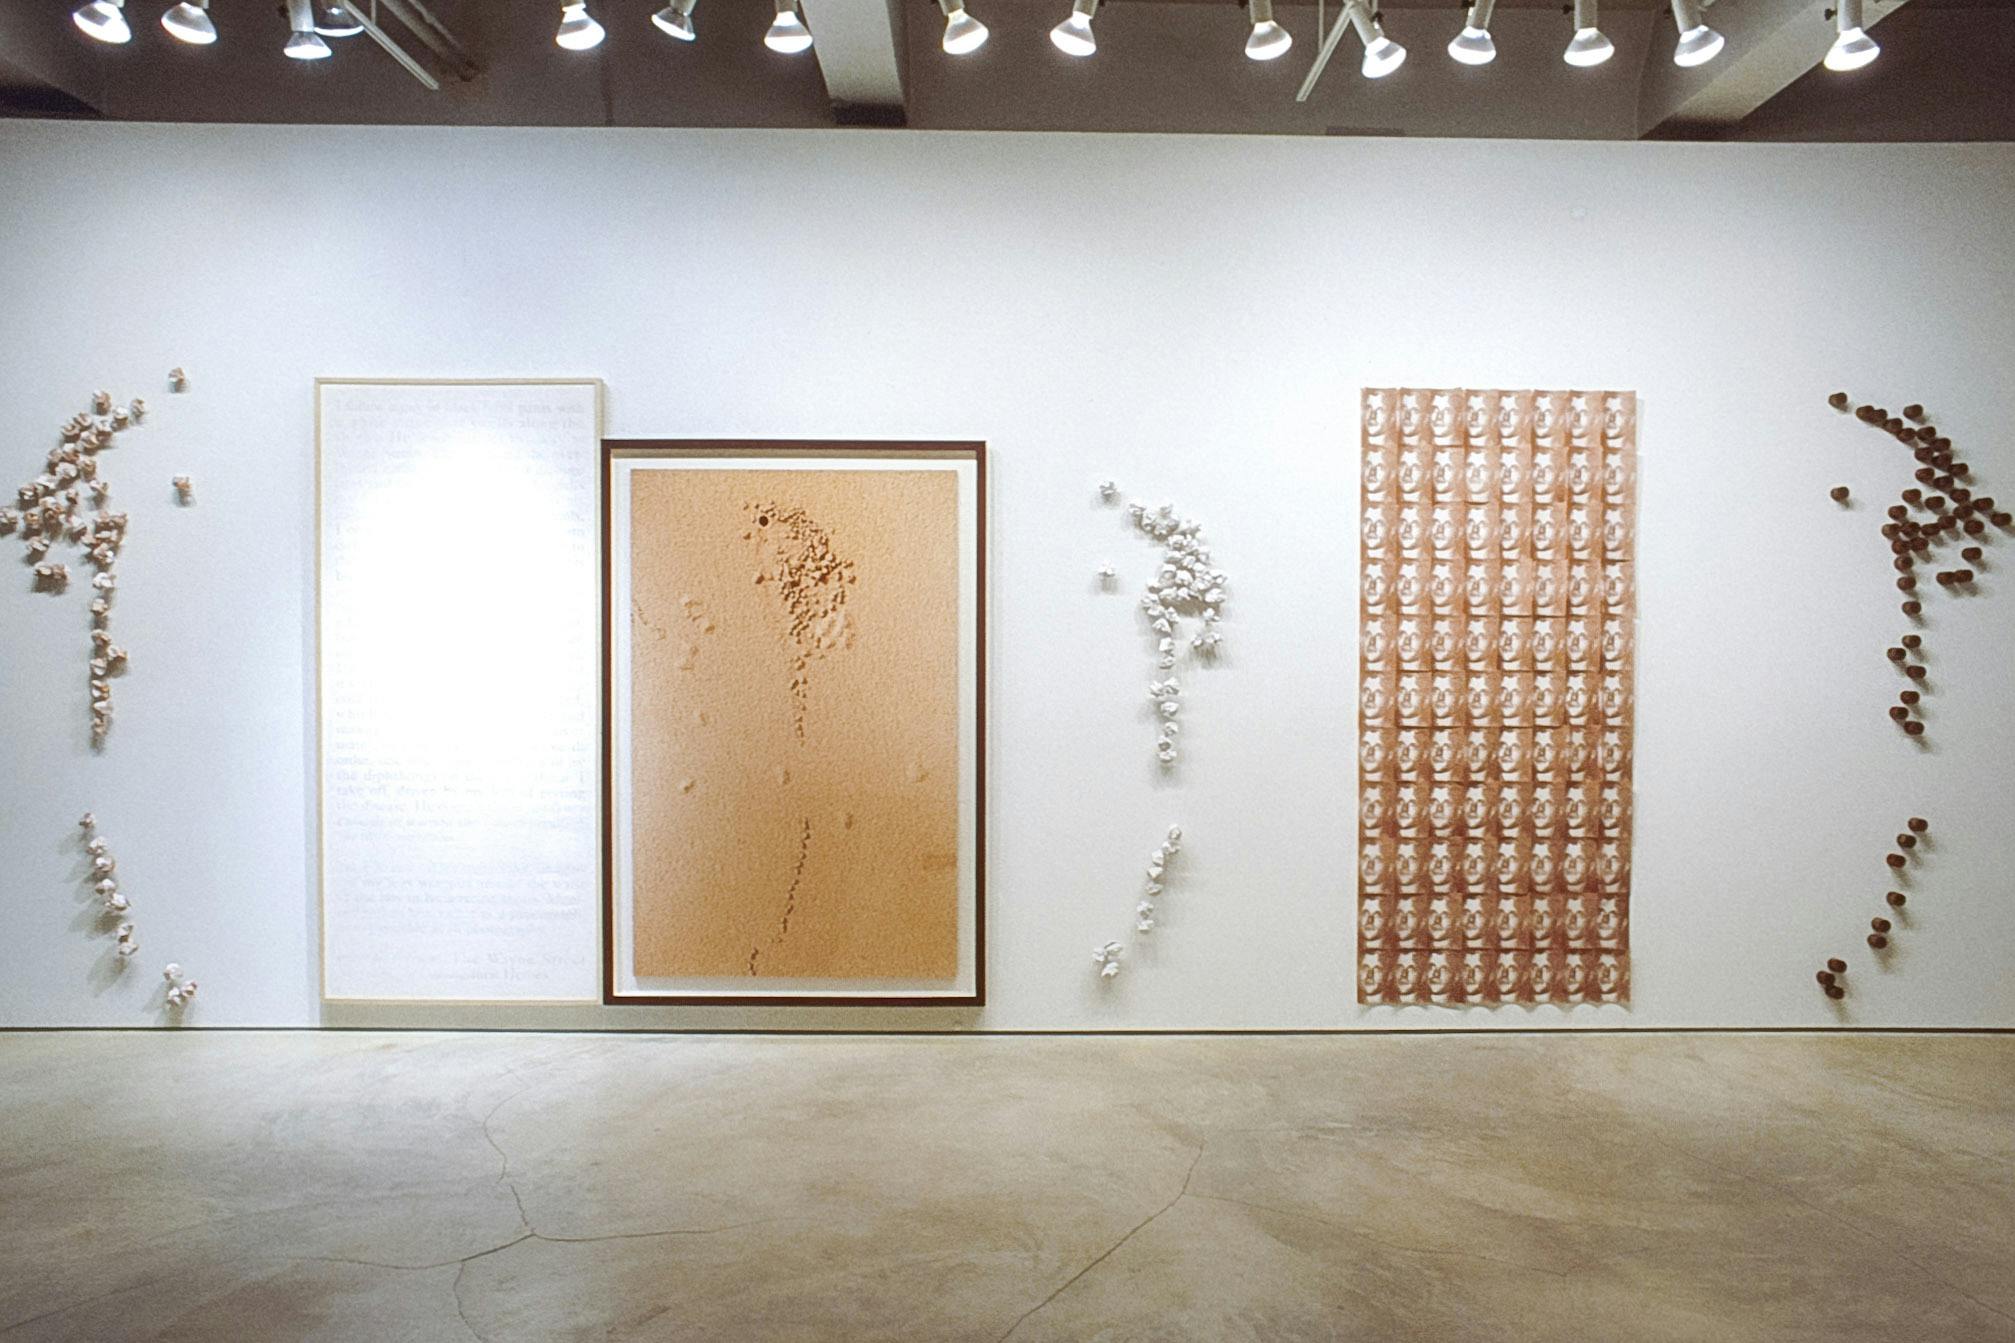 Six artworks are installed on the gallery wall. A collection of metal cylinders and two collections of folded paper are installed in between tall rectangular pictures. All artworks are in brown tones.